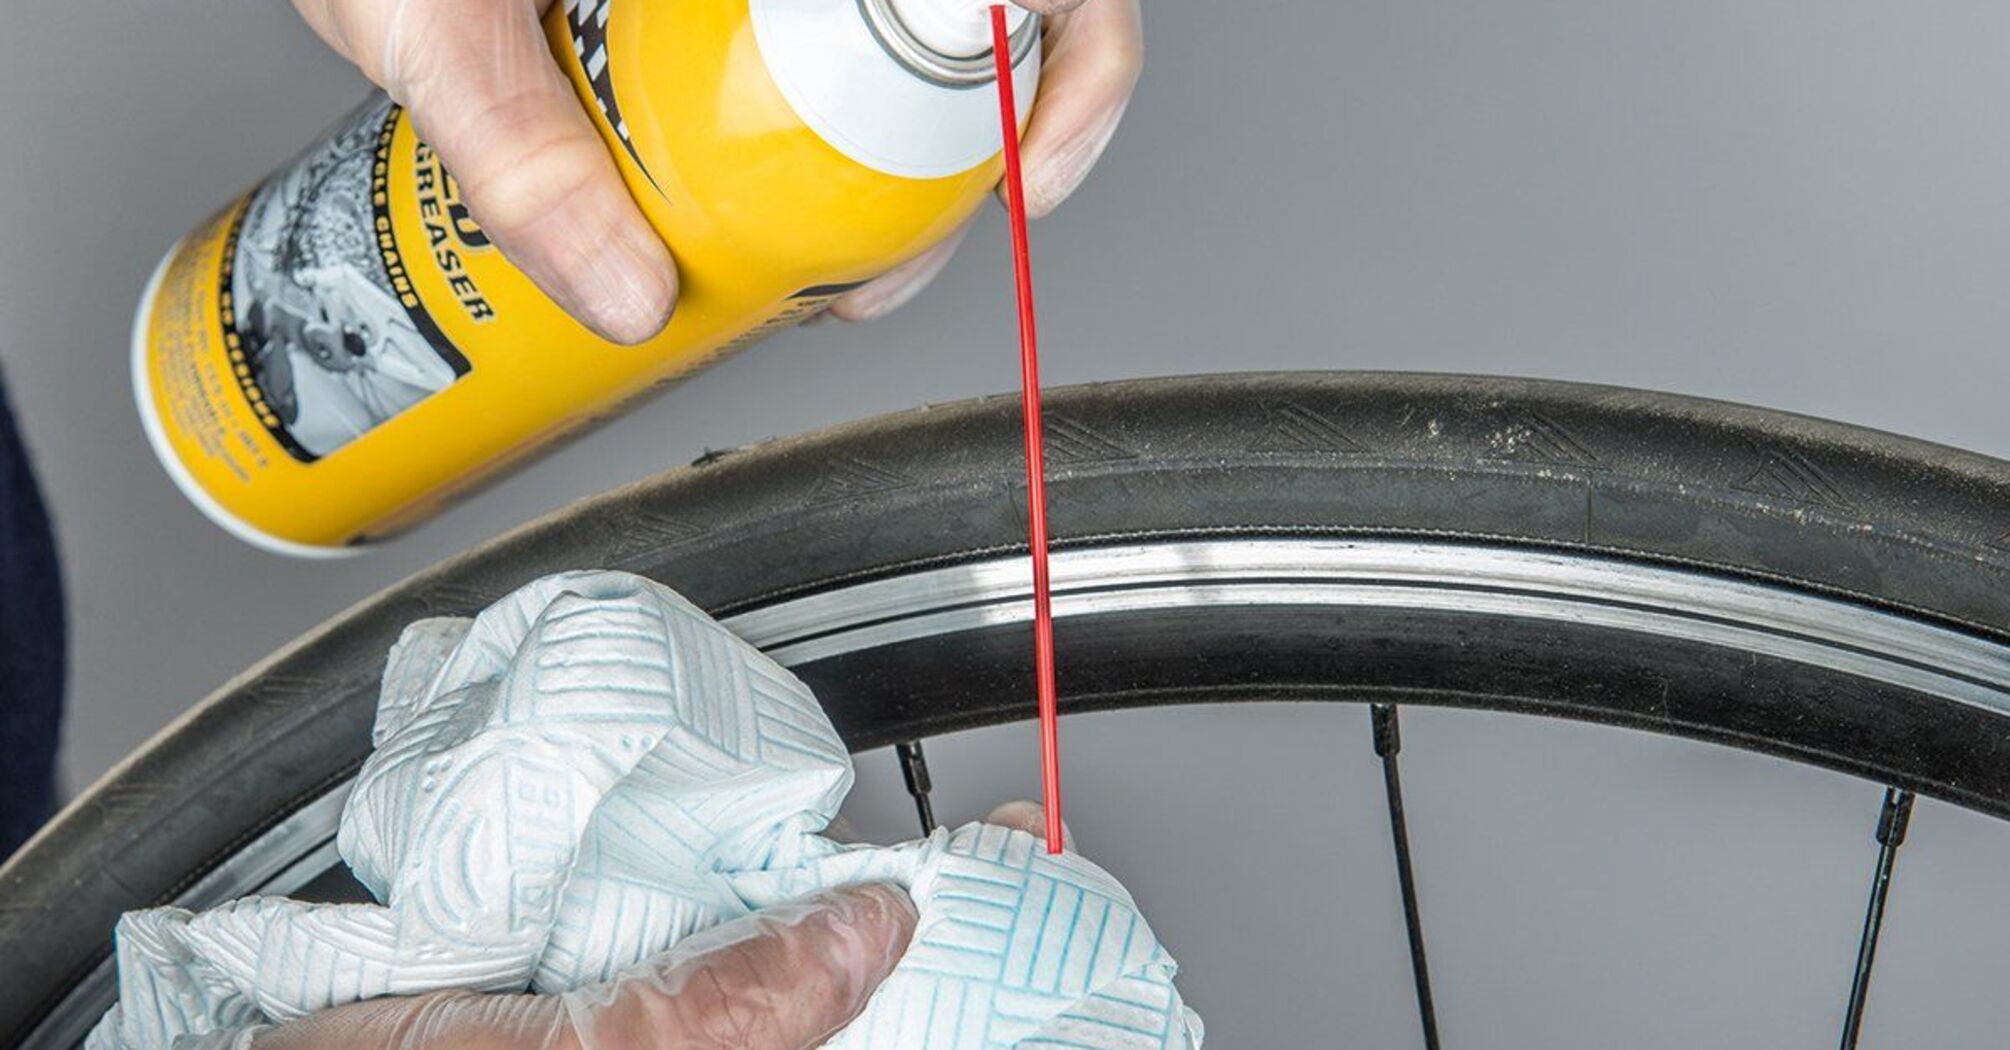 How to get rid of bicycle brake squeal